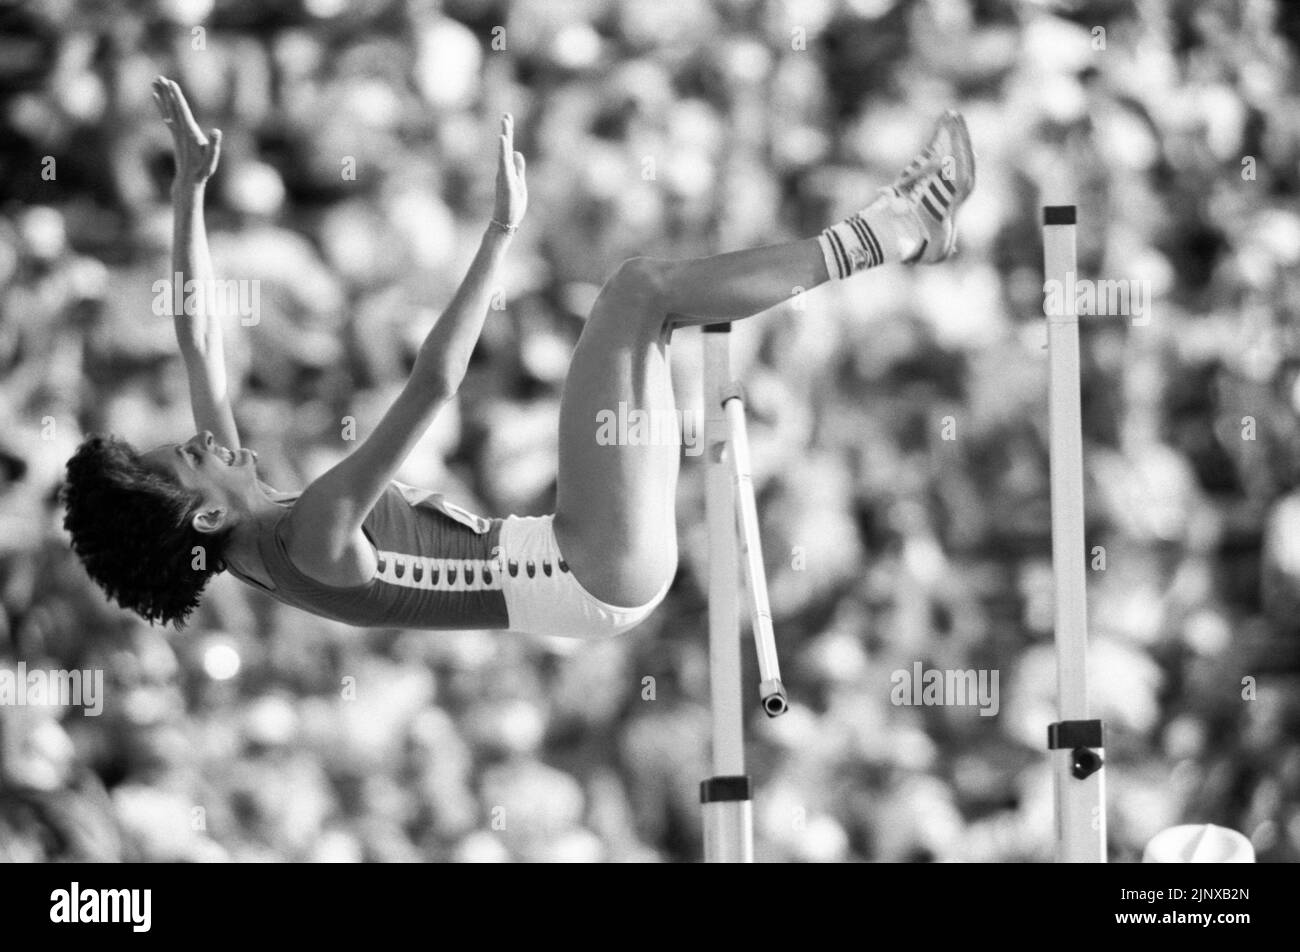 OLYMPIC SUMMER GAMES IN LOS ANGELES 1984 SARA SIMEONI Italy high jump silver medal Stock Photo